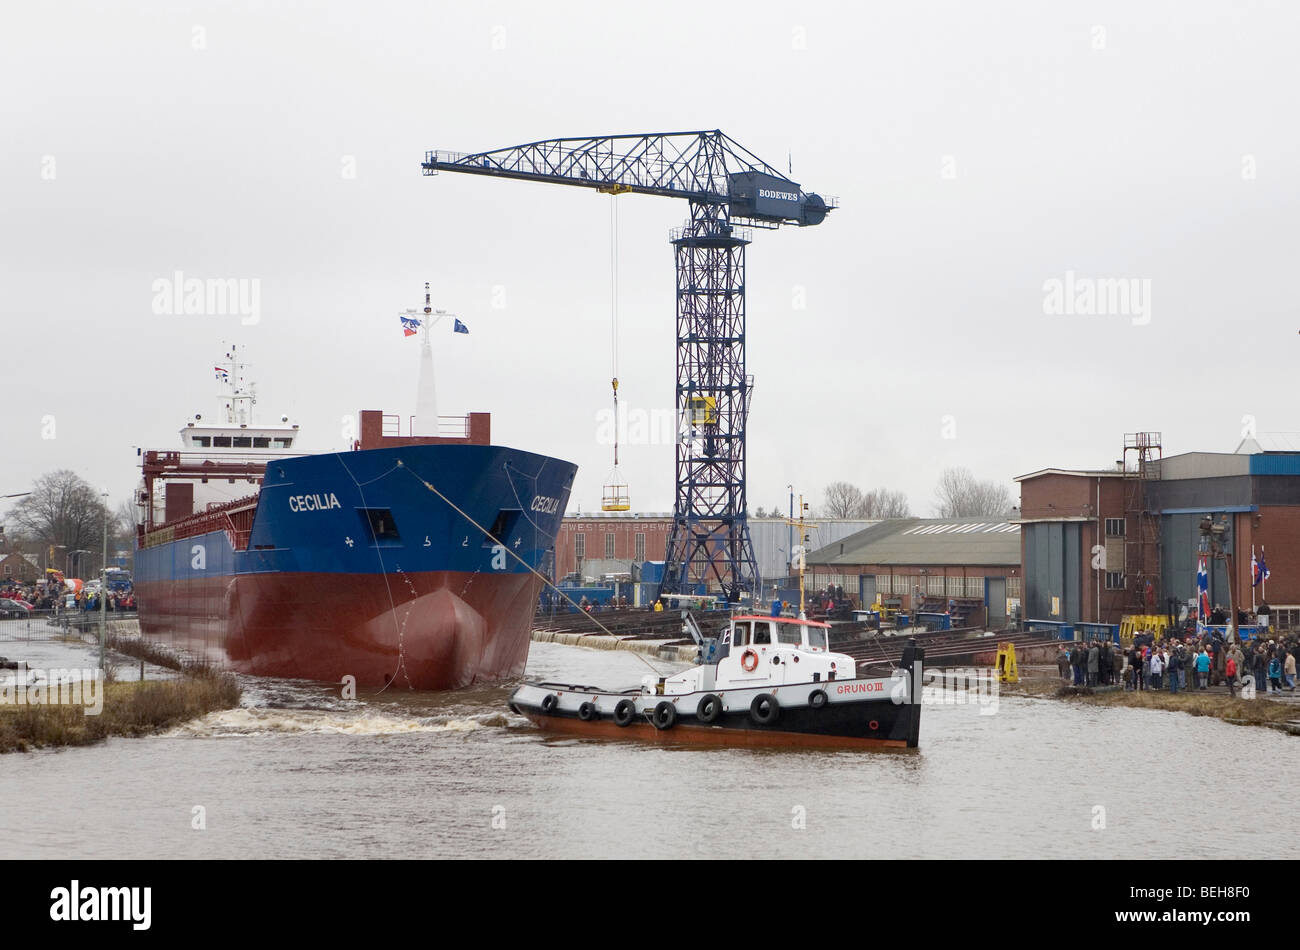 Construction of a ship at a shipyard has been completed and ready to use. Many of the shipyards in Groningen have been bankrupt. Stock Photo